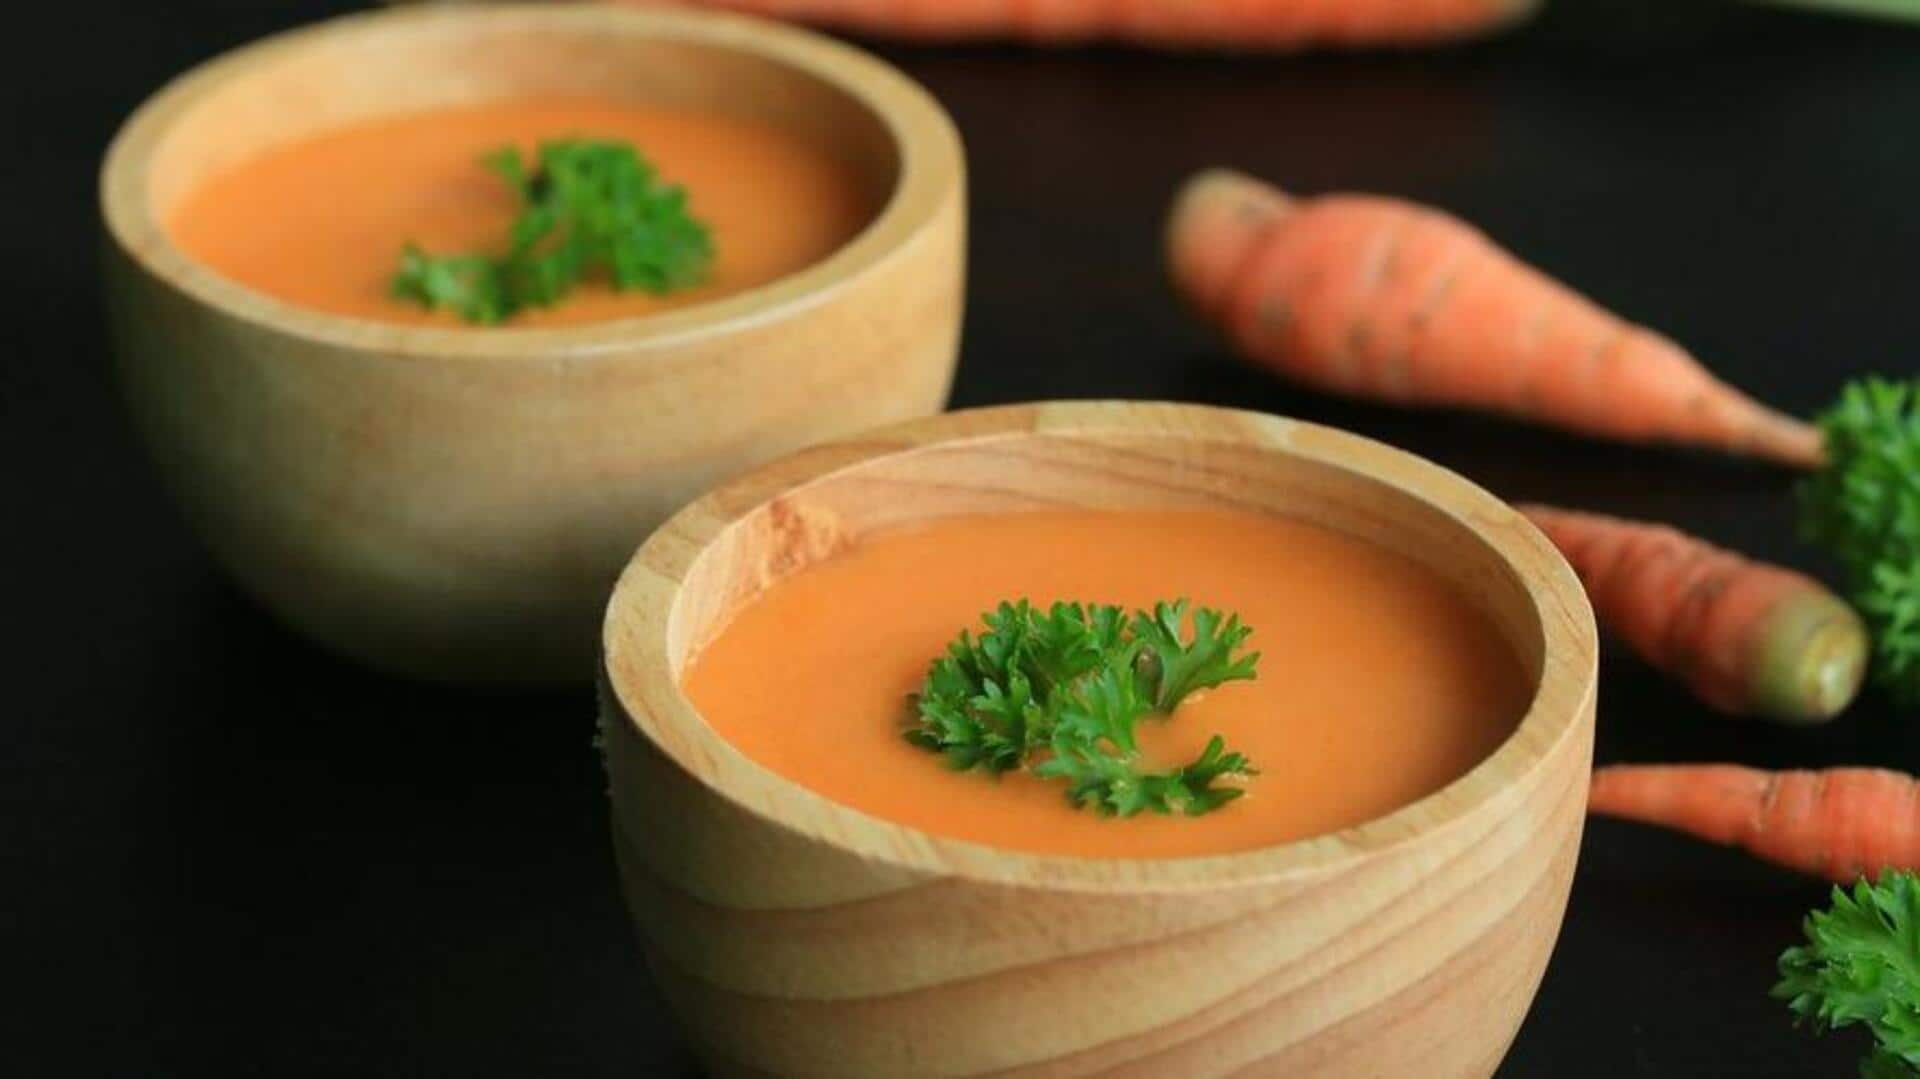 Vegans, unite! Check out these carrot soup recipes